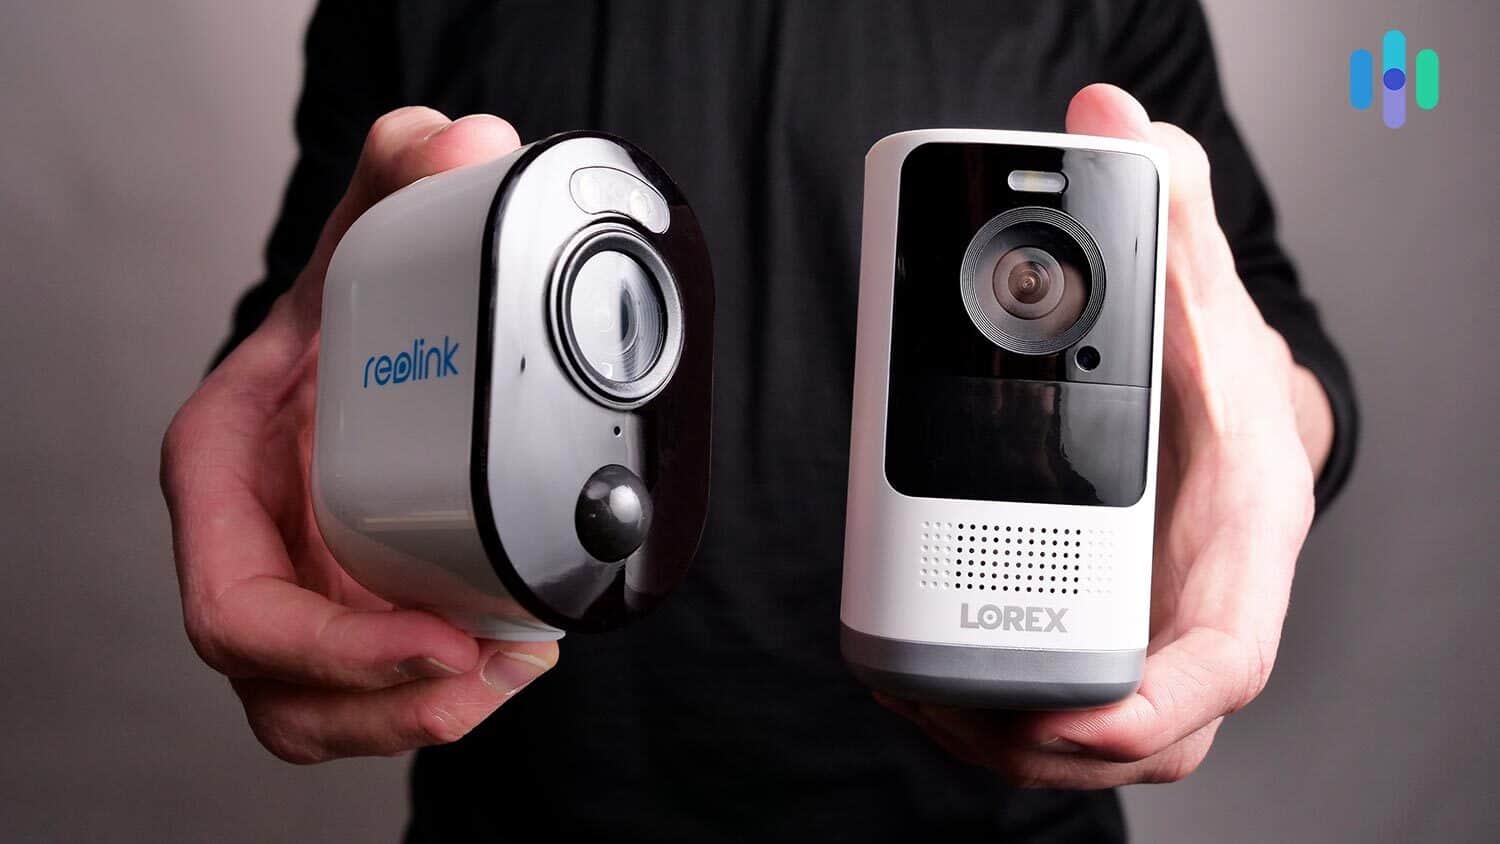 Side-by-side view of Reolink and Lorex cameras